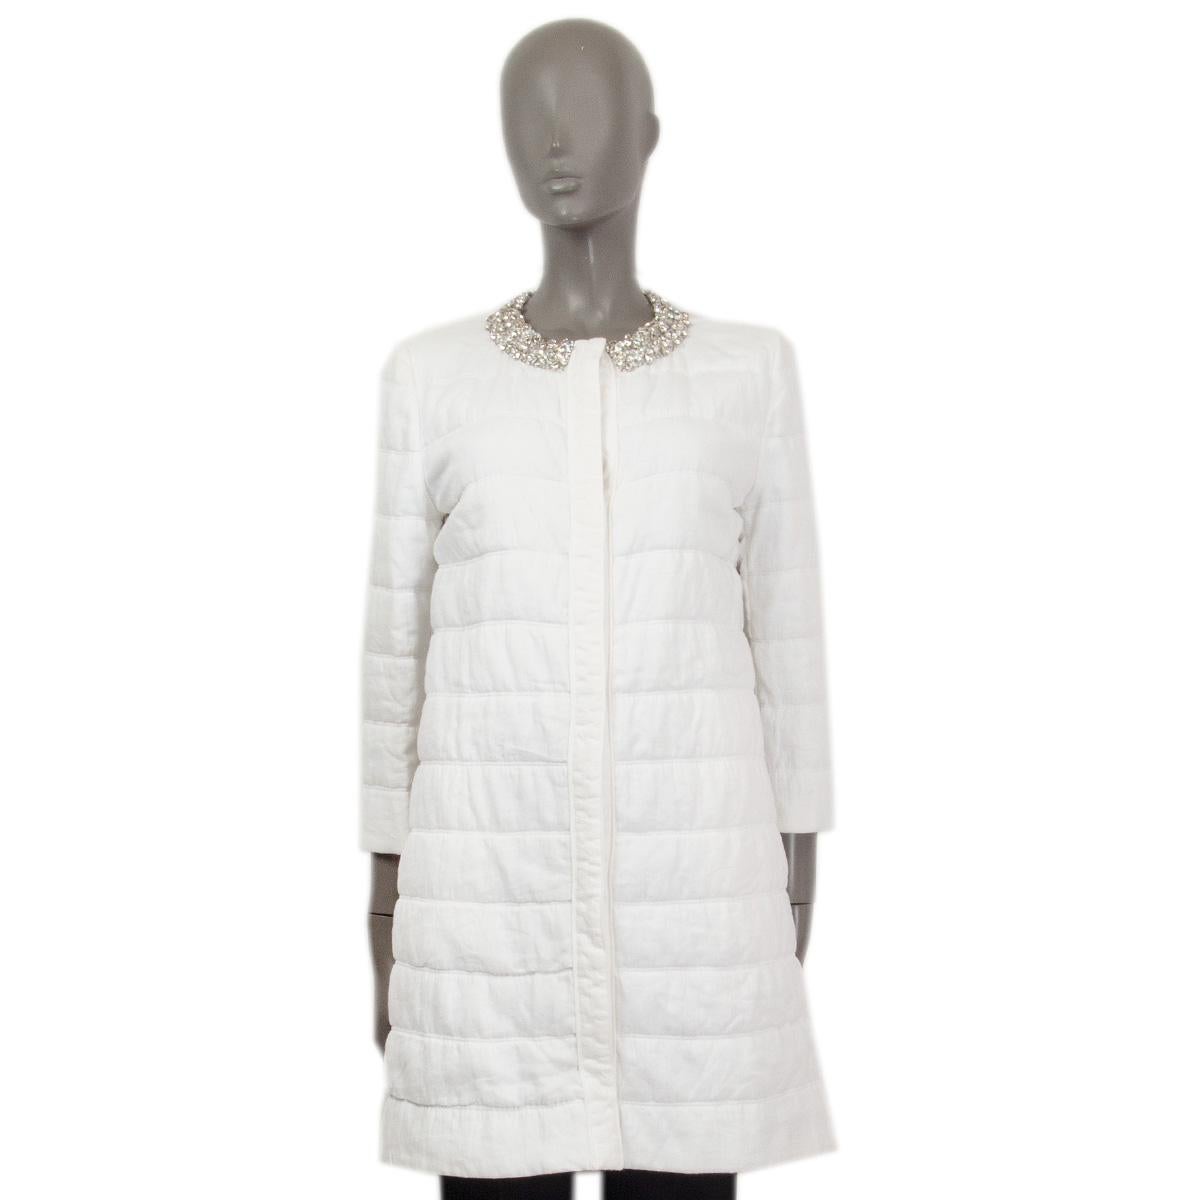 100% authentic Ermanno Scervino quilted crystal embellished collar coat in white linen (100%). Closes with four snap buttons on the front and has slit pockets on the side. Lined in white polyester (100%). Brand new with tag.

Measurements
Tag